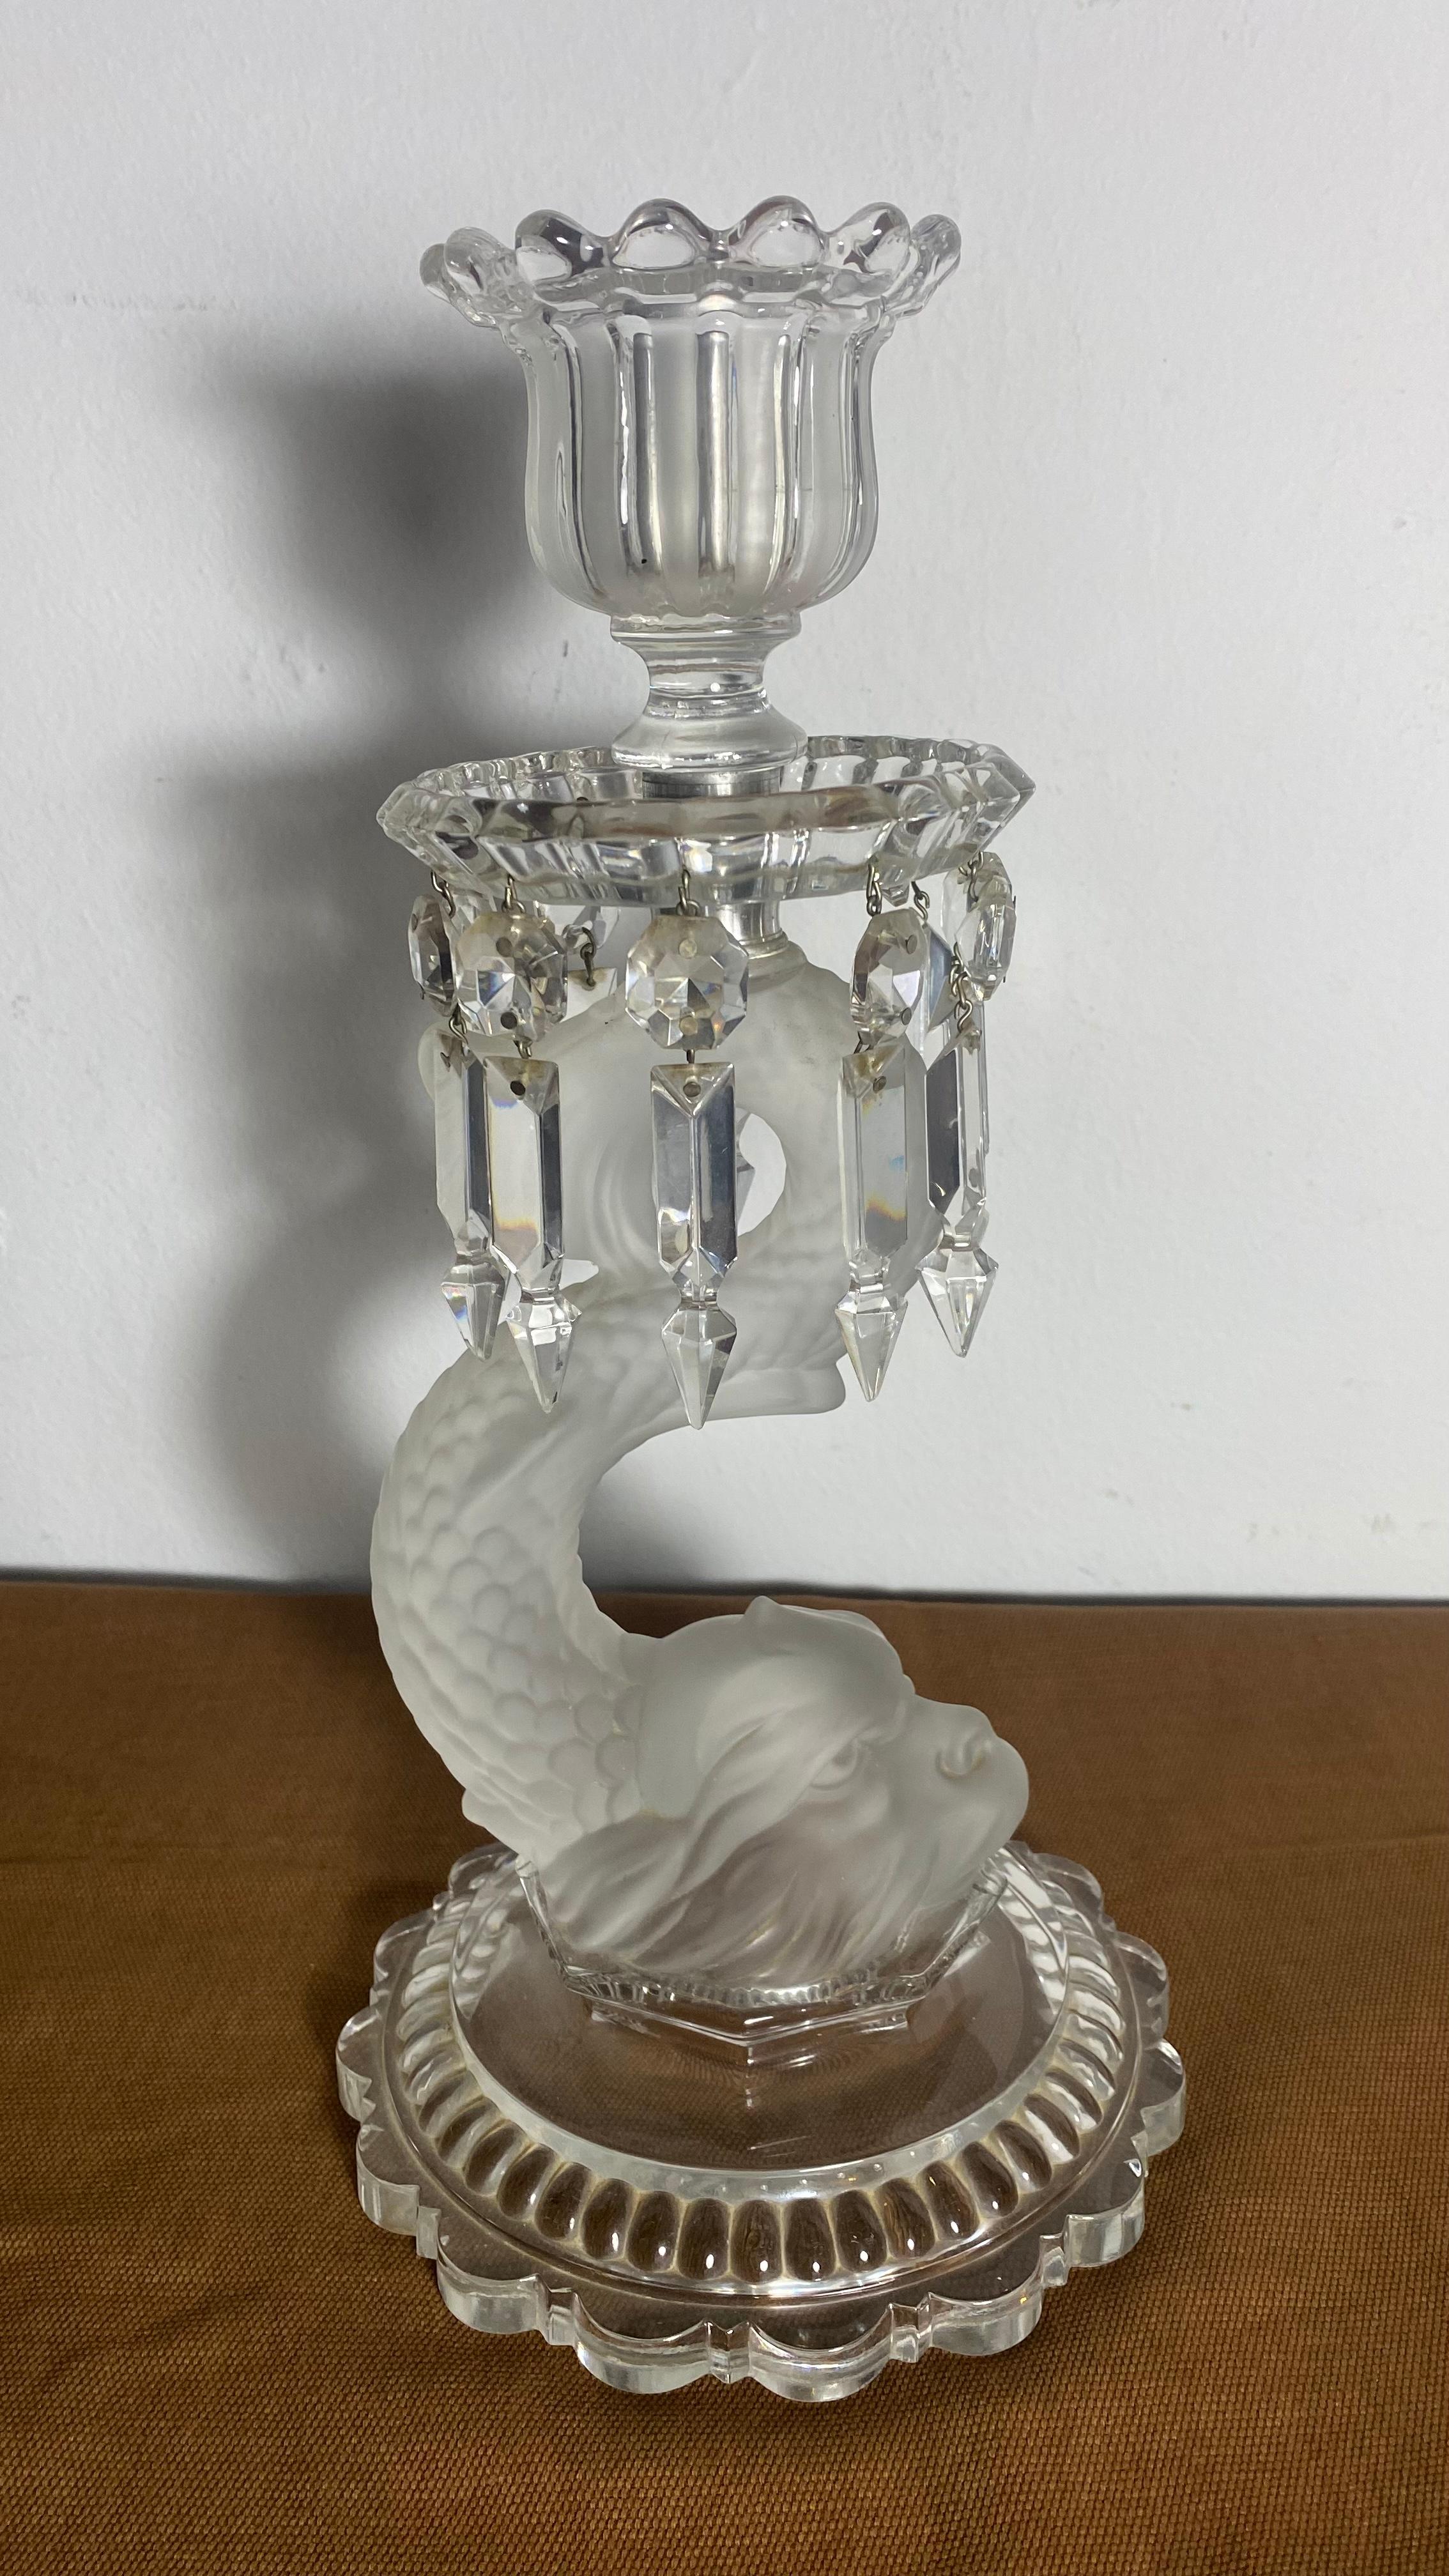 The one-candle dauphin candelabra is handcrafted by the French master glassmakers of the baccarat maison.
The single candle dauphin candlestick has a height of 35 cm.
The diffuser is 23cm.
The baccarat dauphin candelabra can be an excellent gift